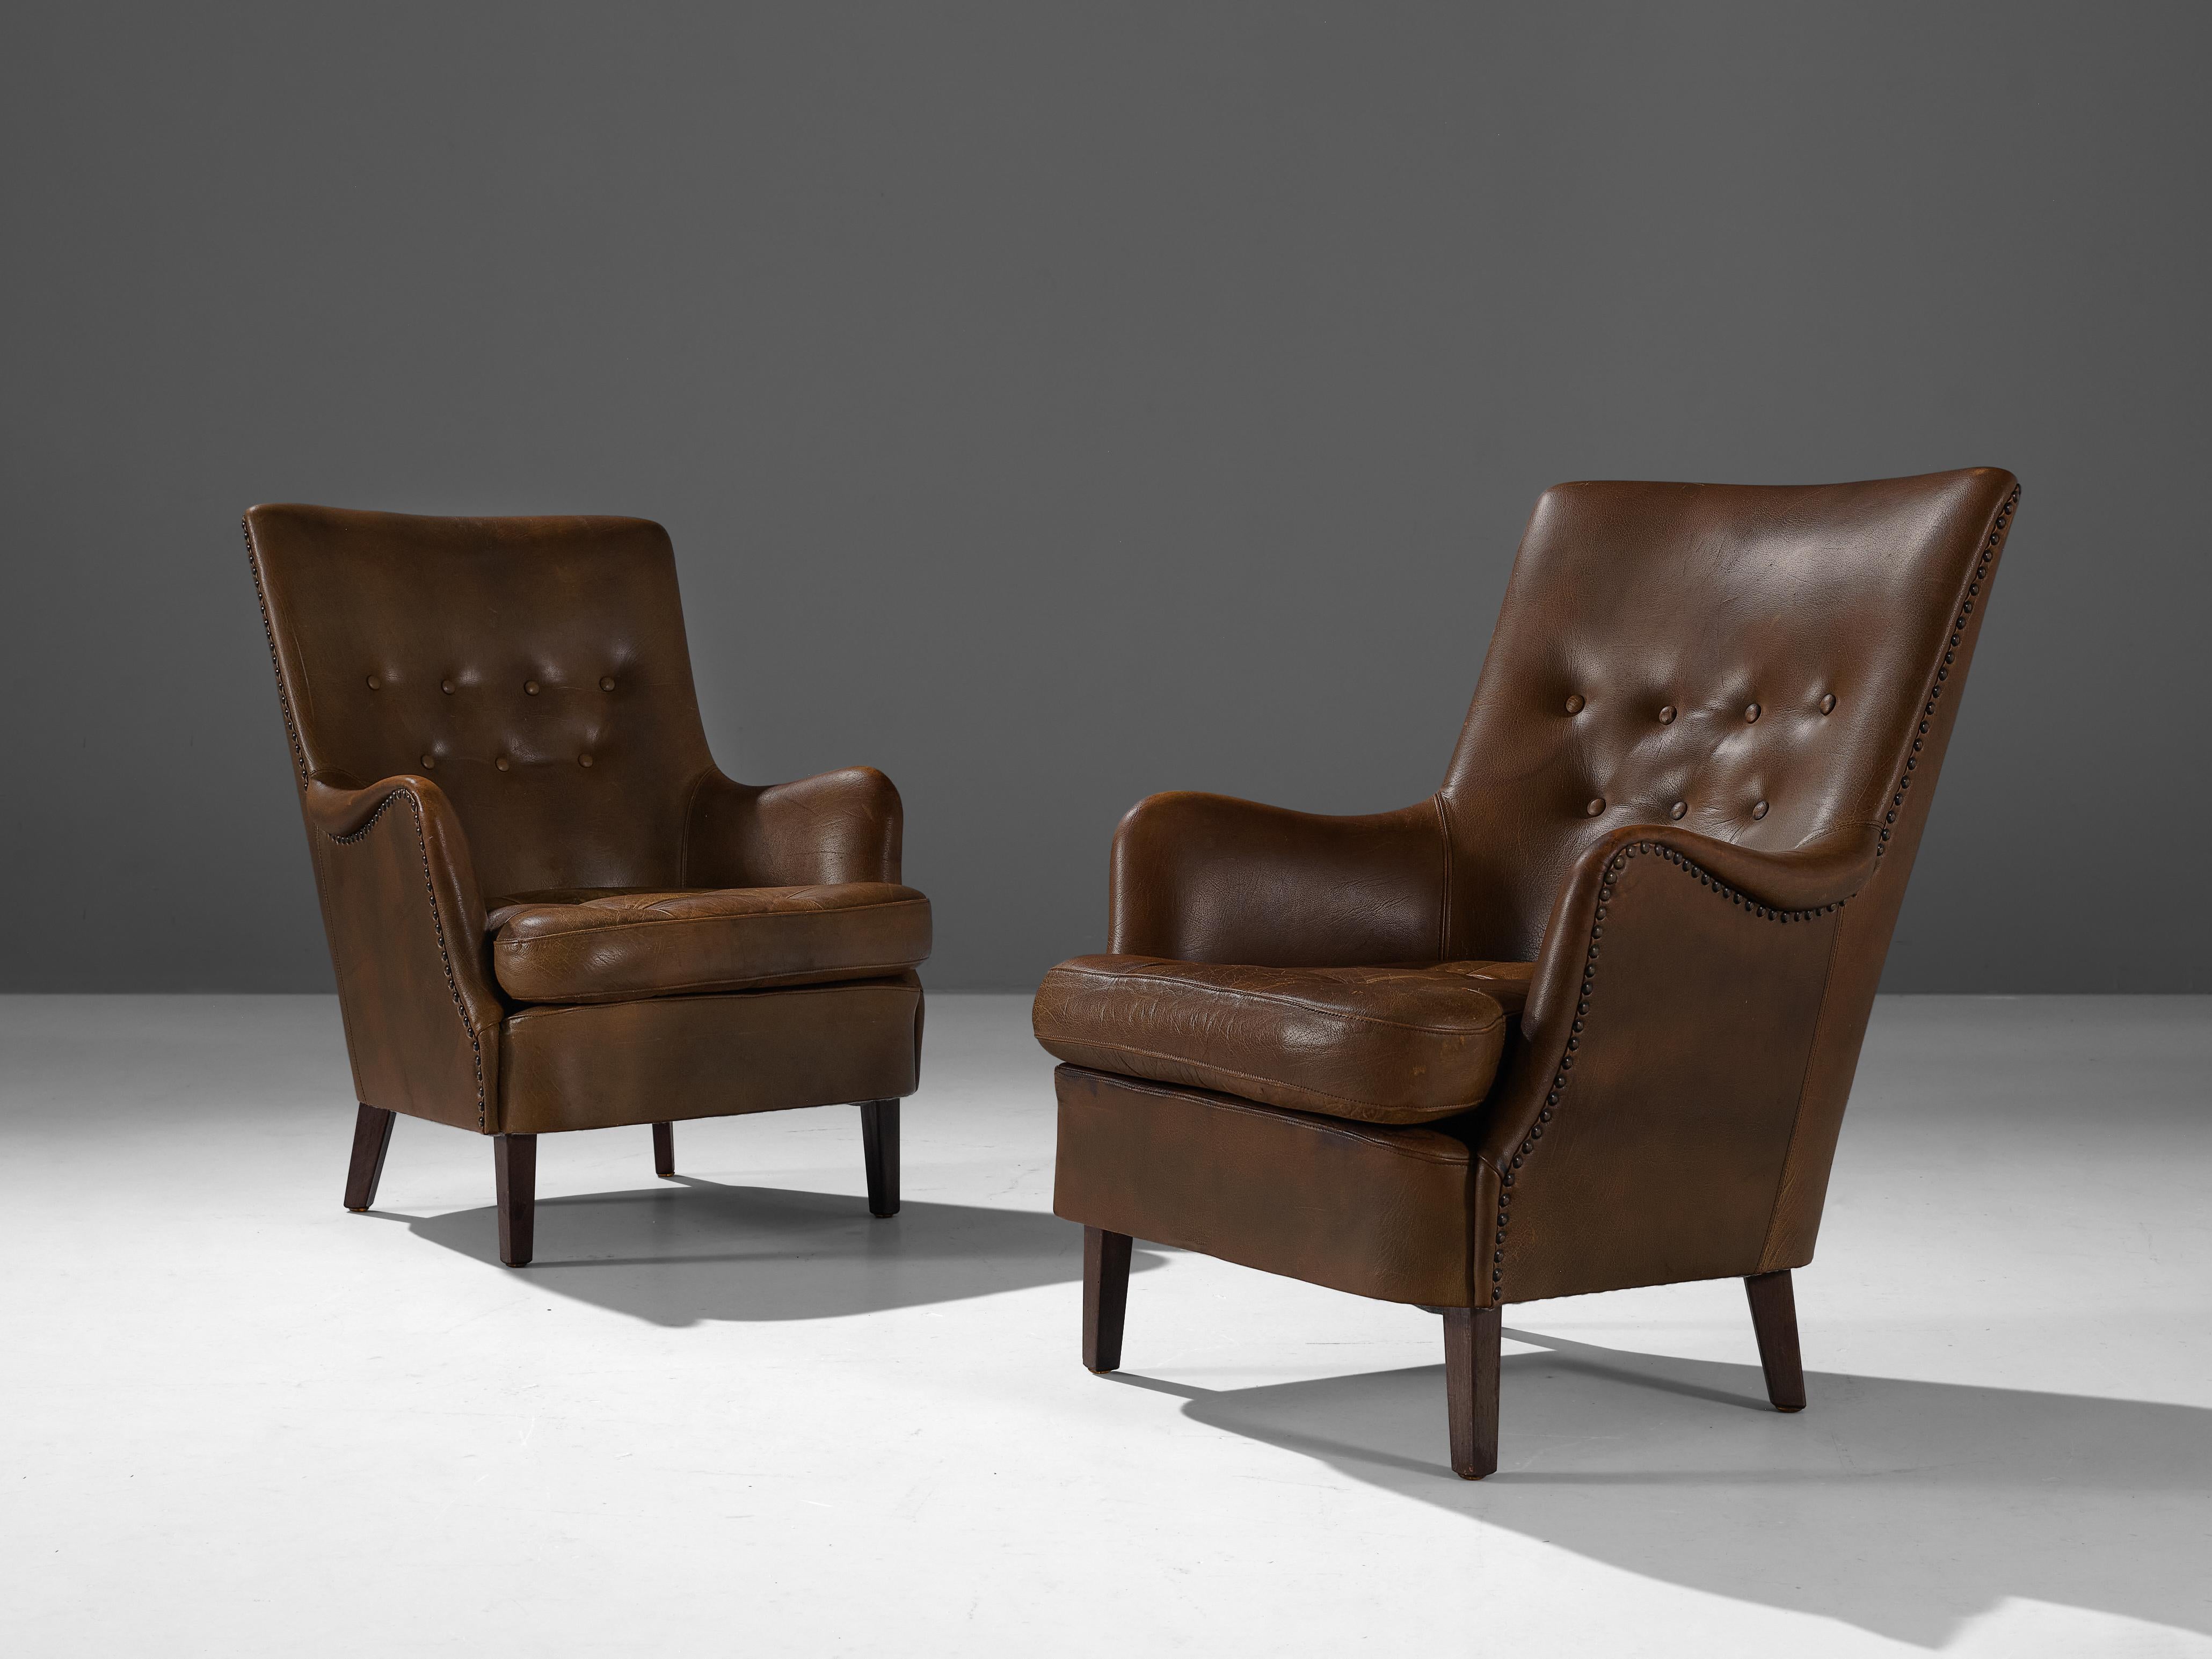 Lounge chairs, leather, beech, brass, Denmark, 1950s

Comfortable Danish lounge chairs in patinated brown leather. The leather is fixated to the chair with brass nails that contribute to the authentic look of the chair. Overall patina on the